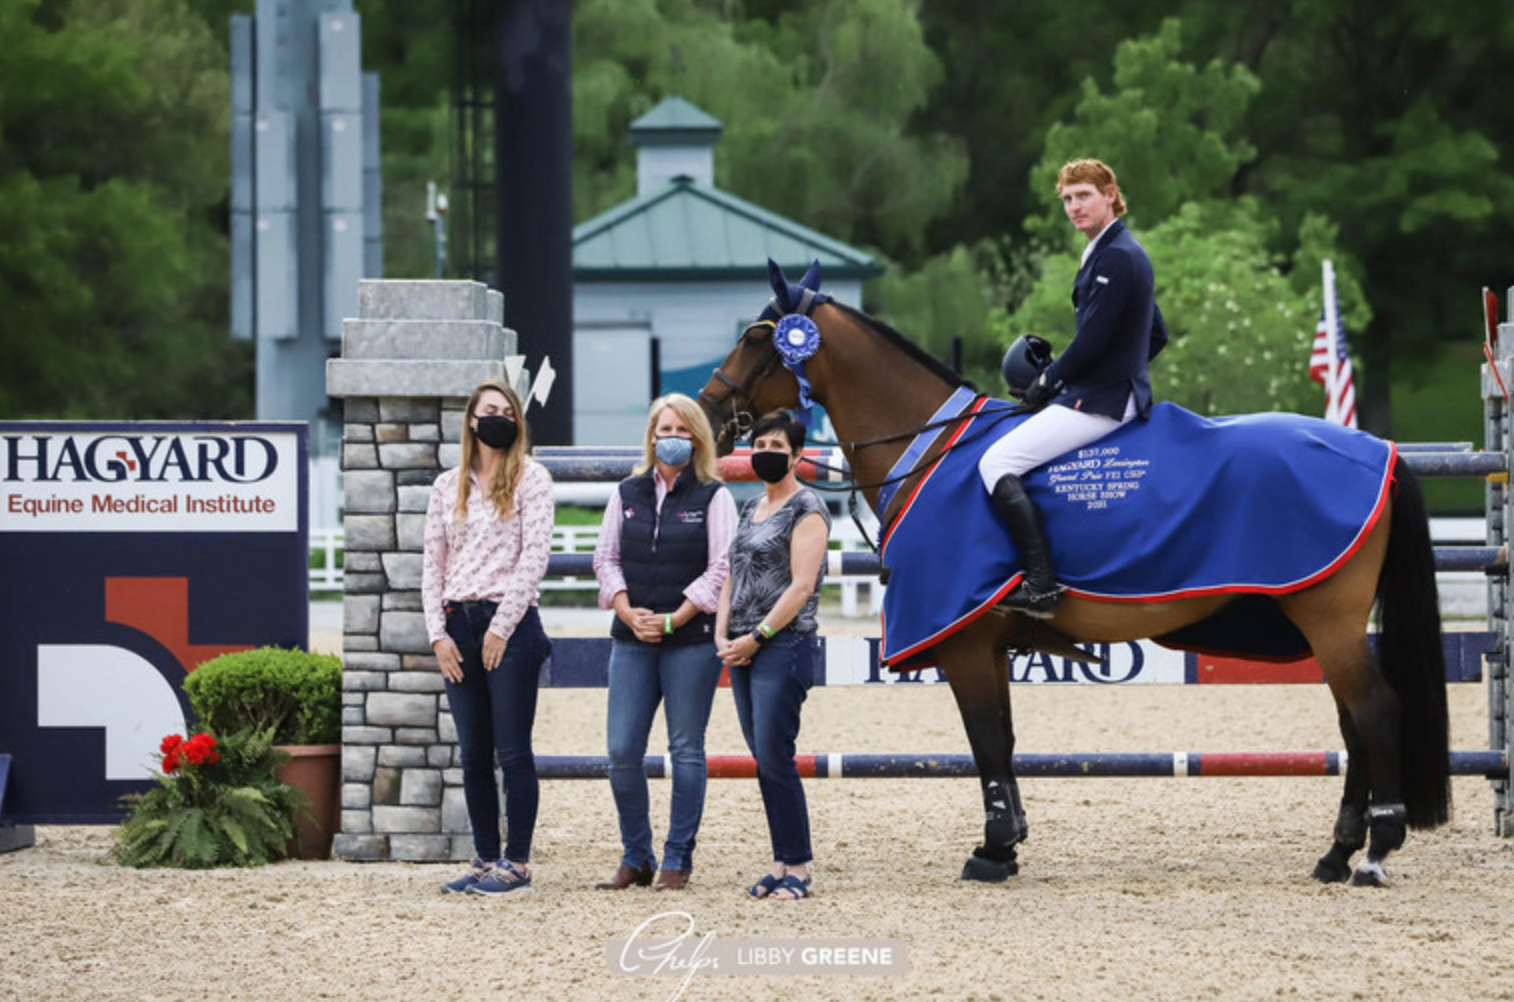 Daniel Coyle and Legacy are unstoppable to win $137,000 Hagyard Lexington Grand Prix CSI3* at Kentucky Spring Horse Show